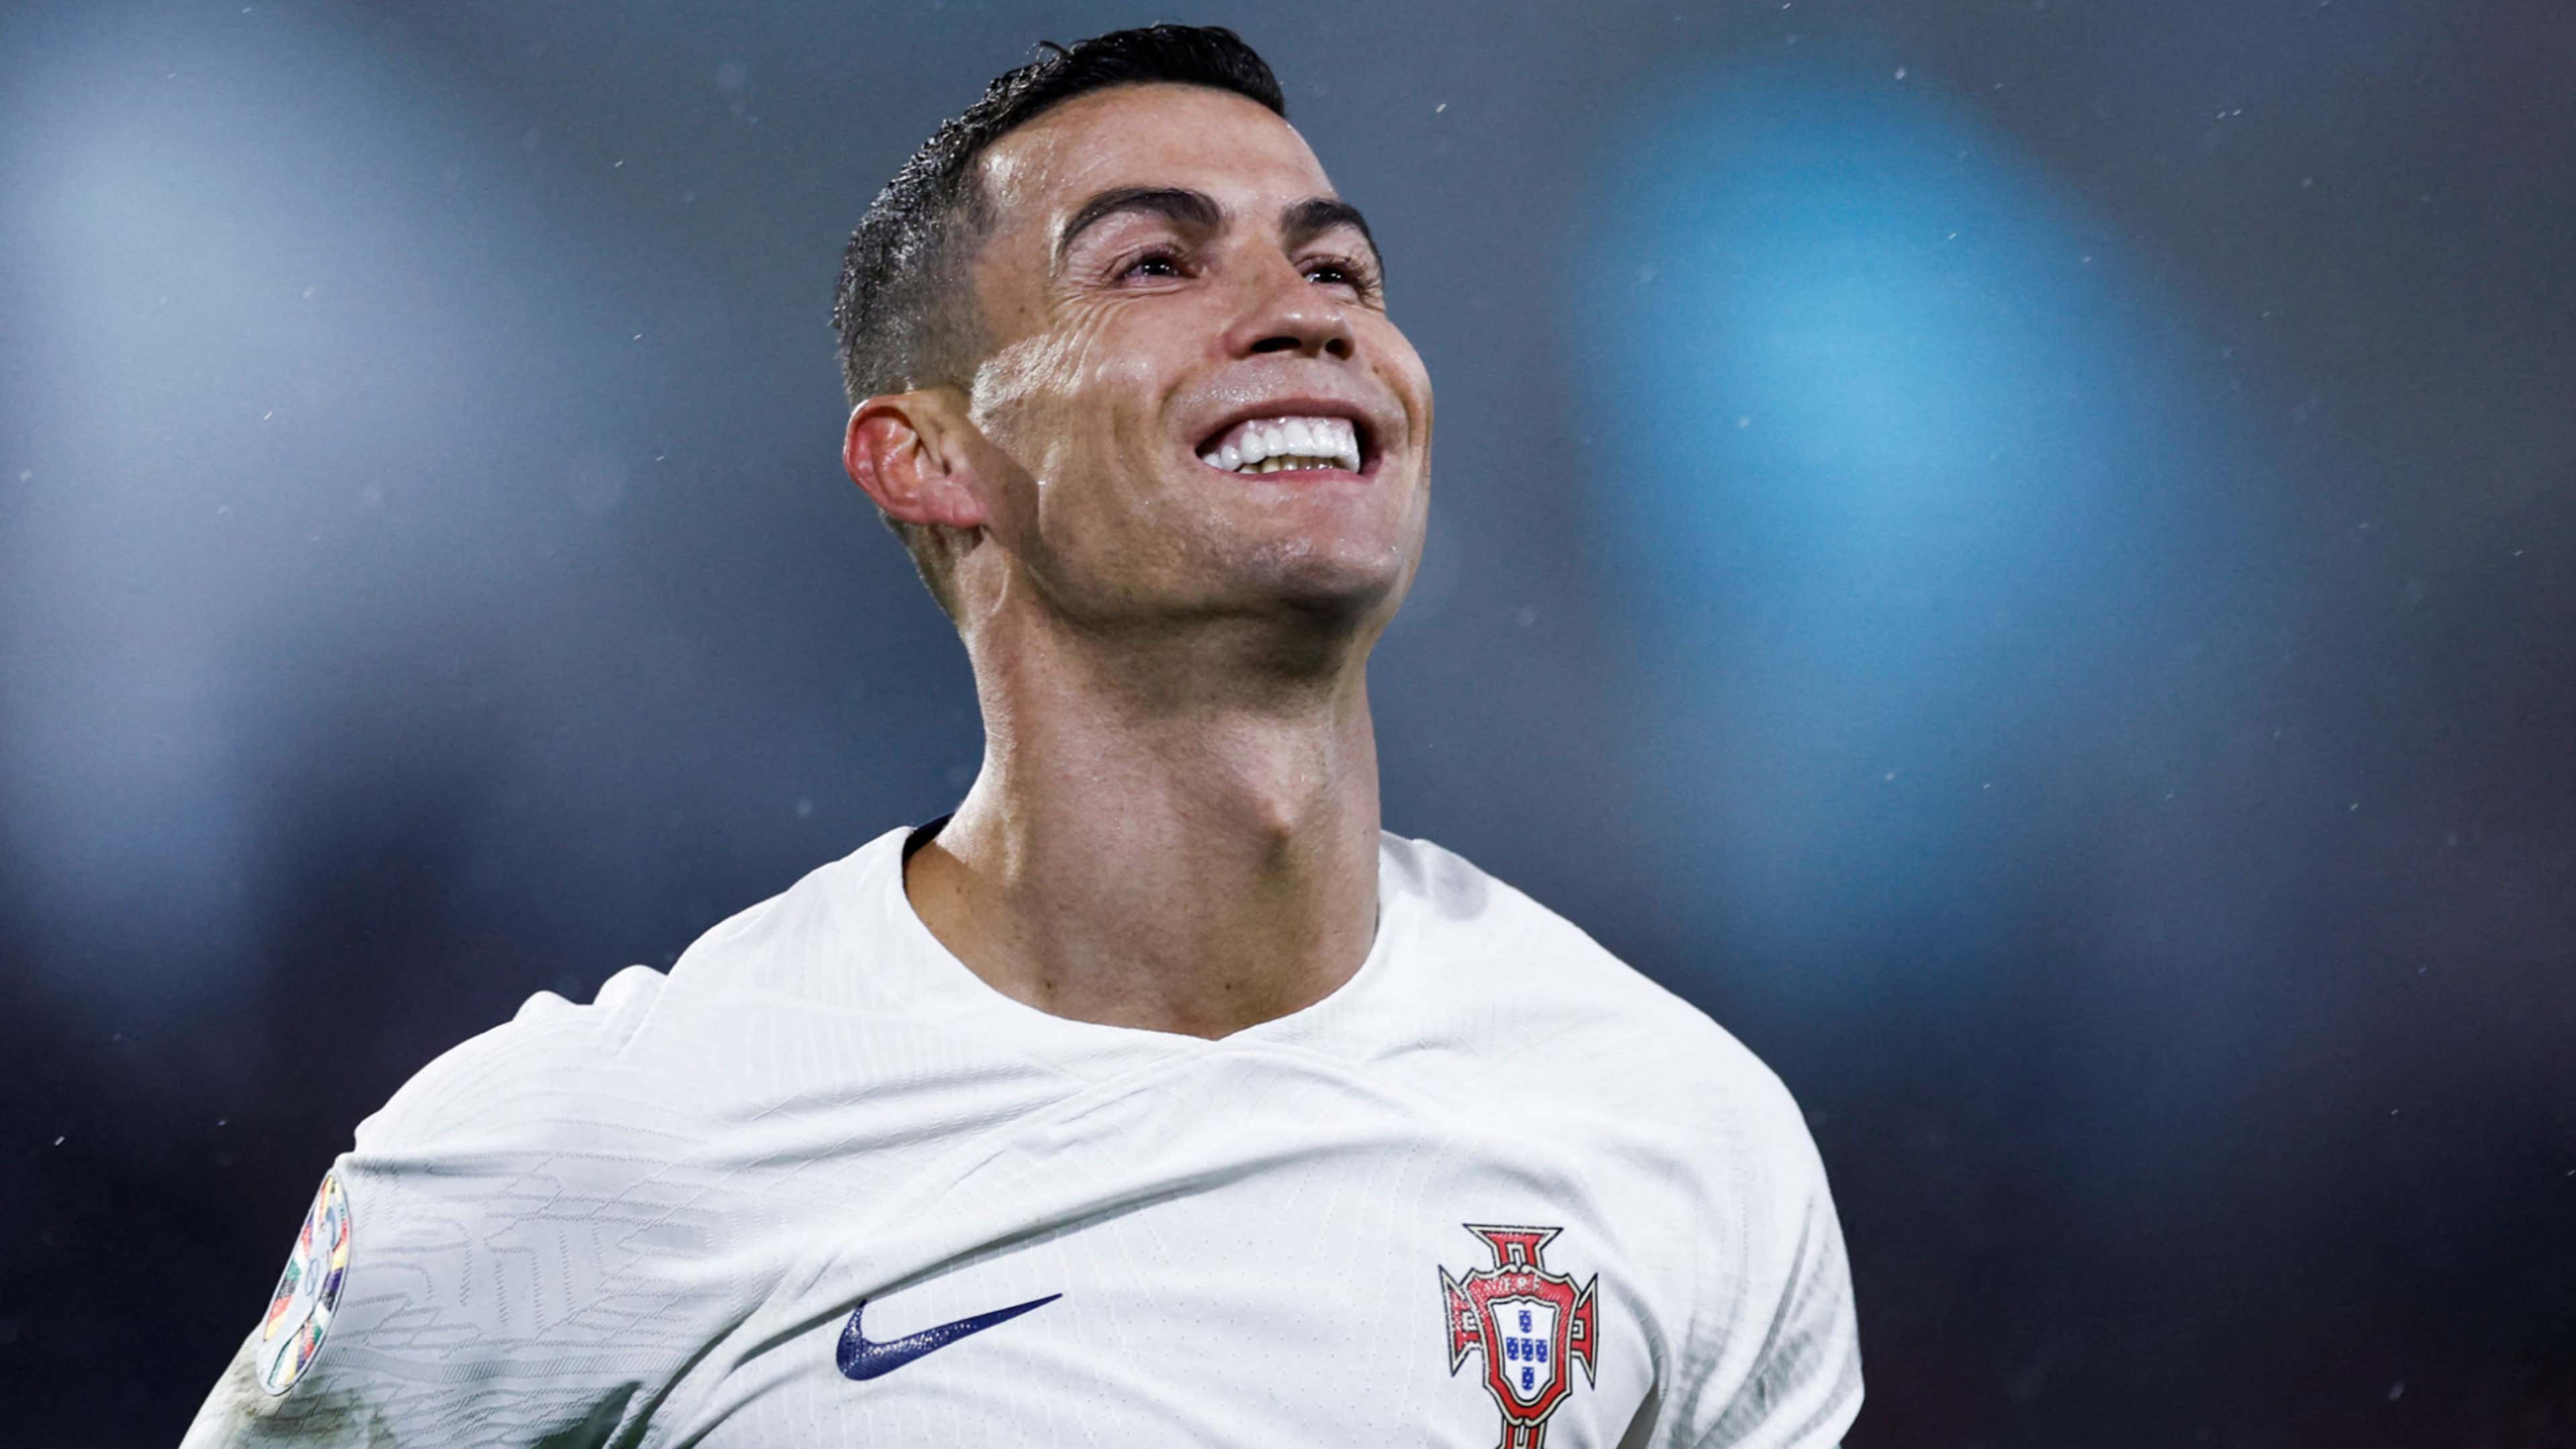 The Original Ronaldo Just Announced That He's the Other Cover Star